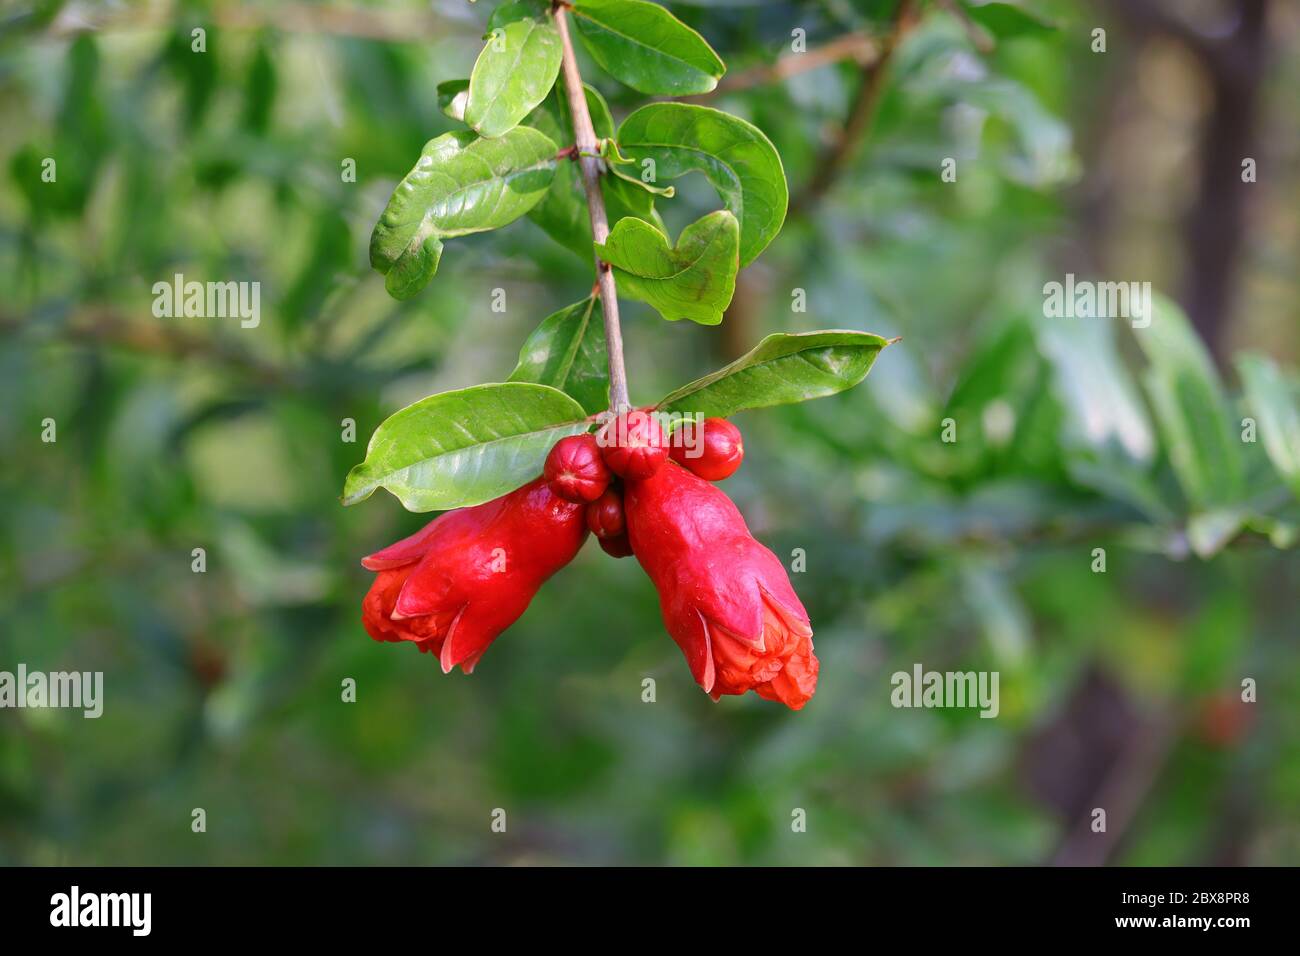 pomegranate flower photography, HD background image, pomegranate flower on tree Stock Photo